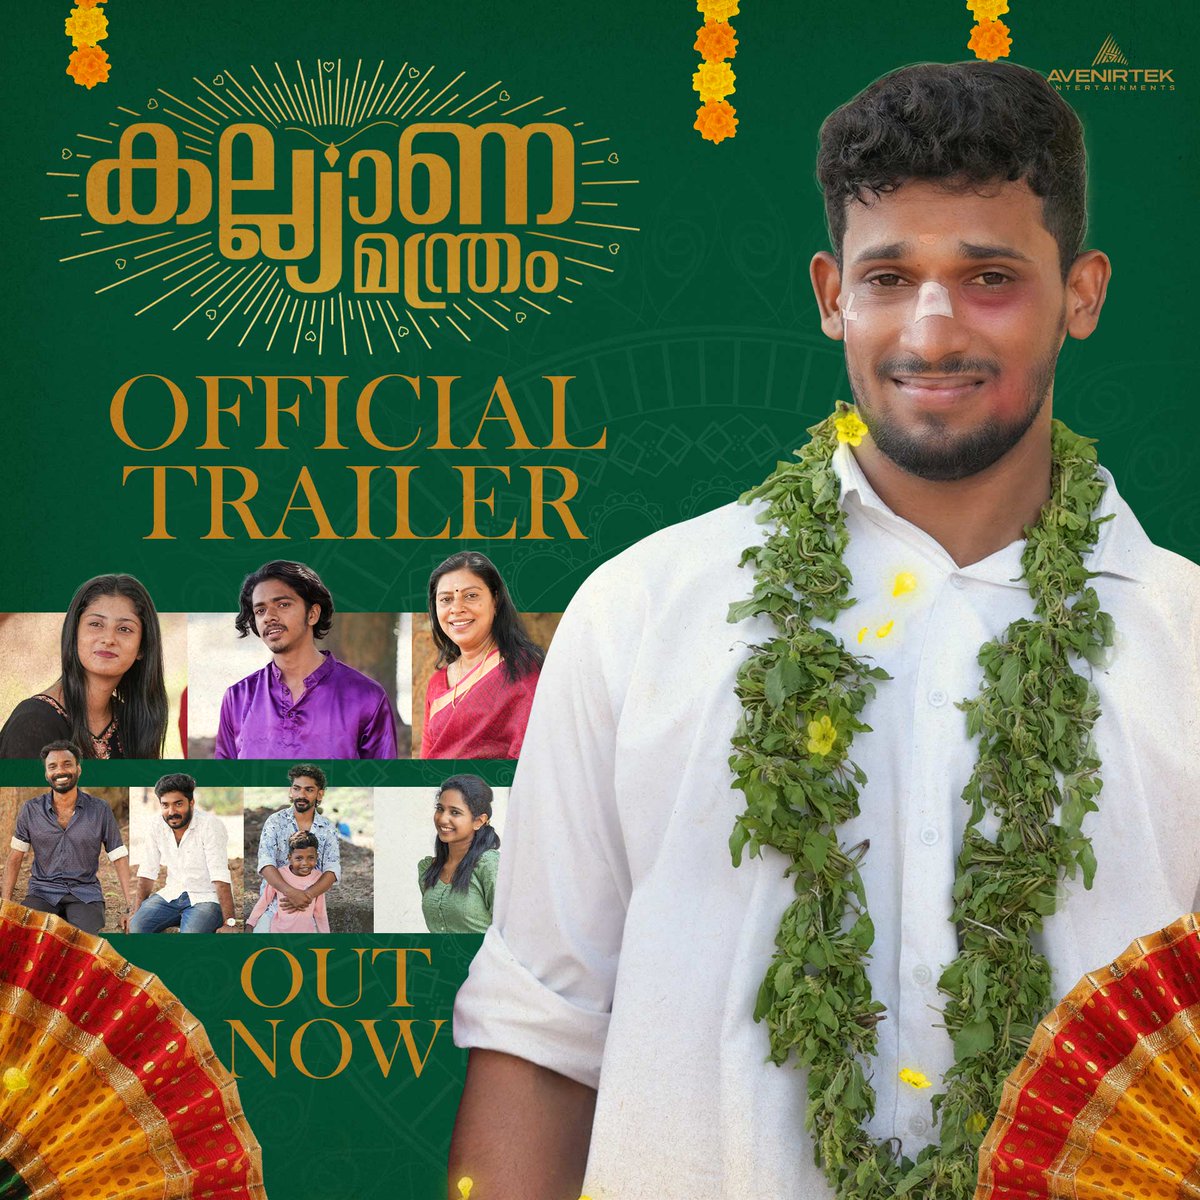 Looking for a good laugh and some romance? Check out the trailer for Kalyana Manthram, The Malayalam short film you won't want to miss! Watch Now : youtu.be/eDIpuFcw4bI #kalyanamathram #MalayalamShortFilm #shortfilmtrailer #romanticcomedy #avenirentertainments